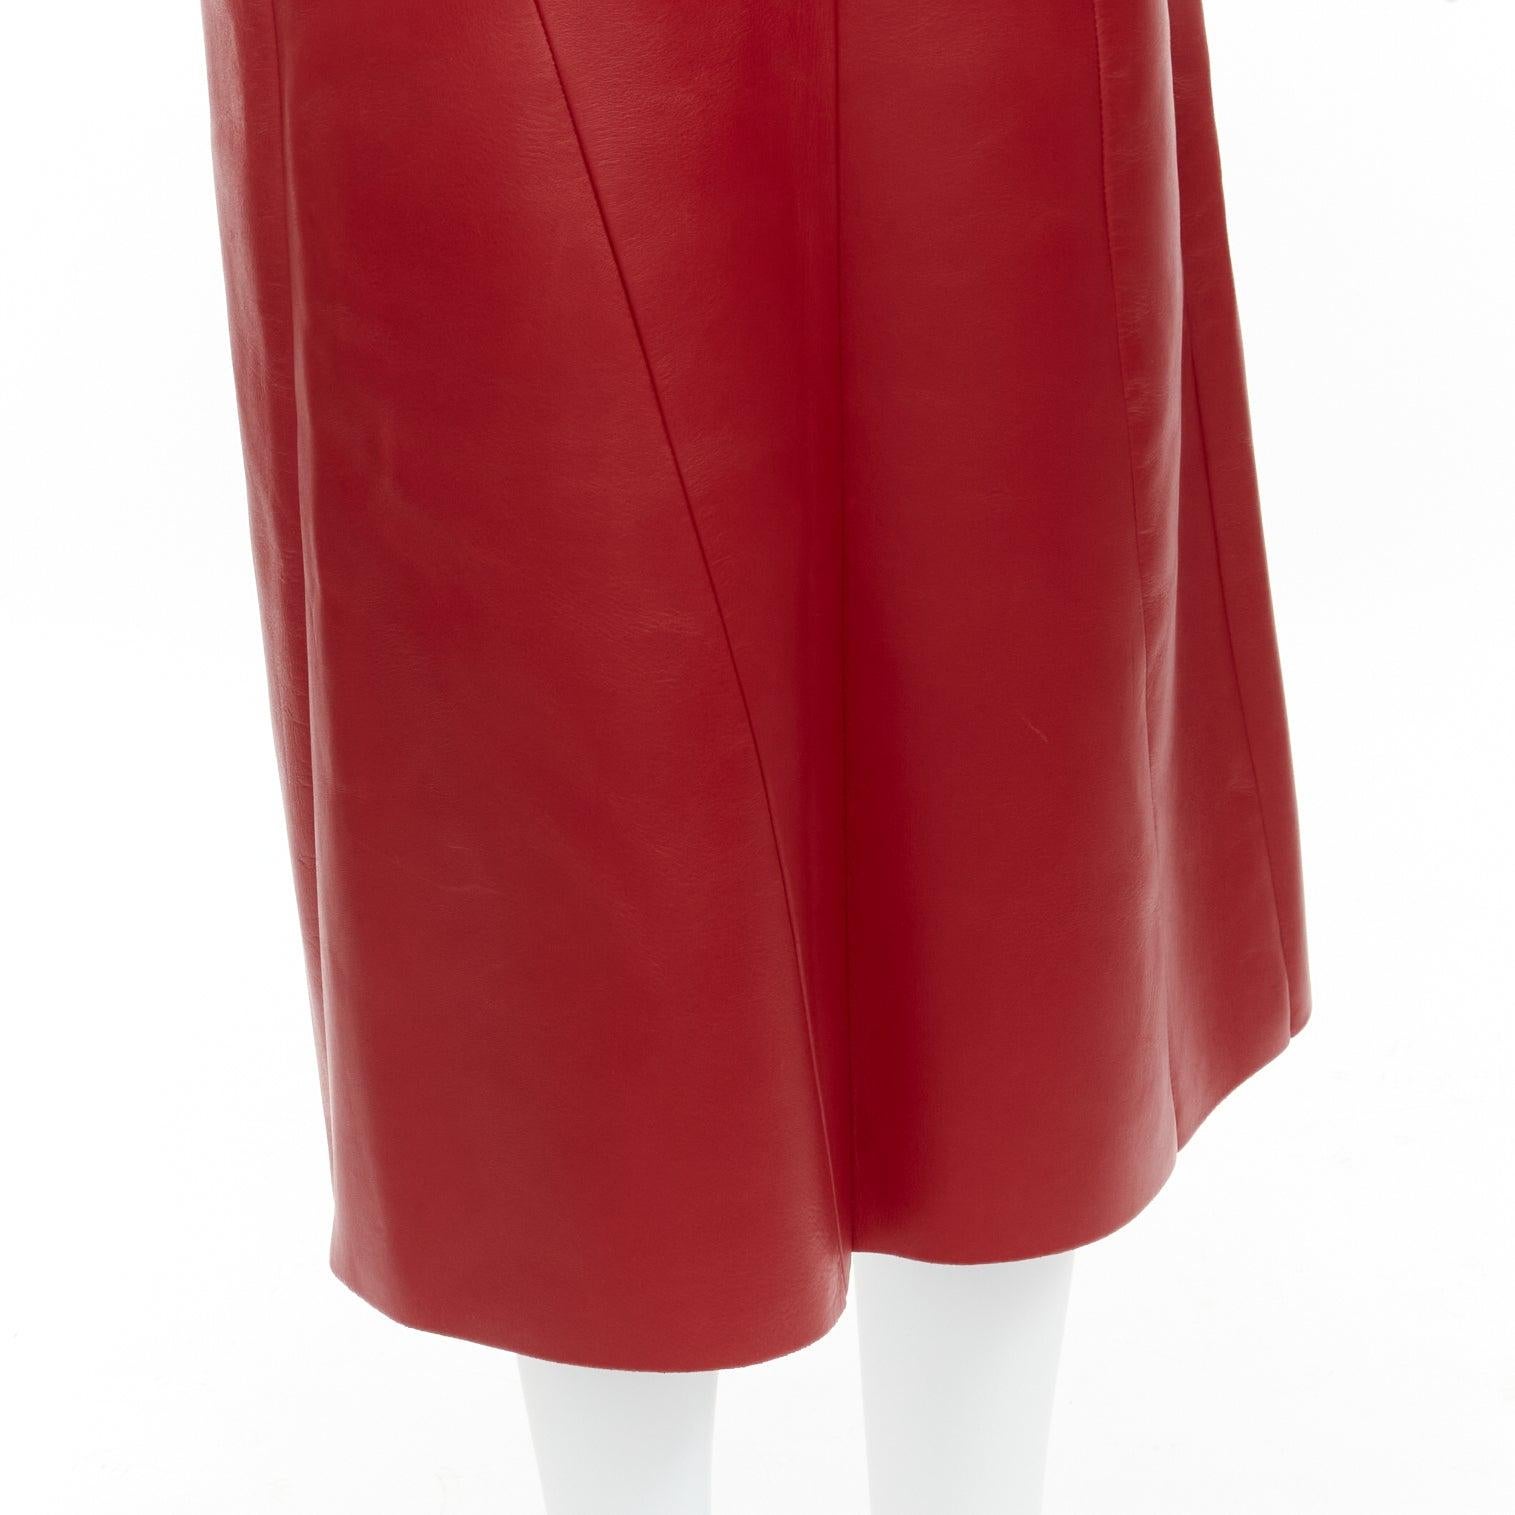 OLD CELINE Phoebe Philo red lambskin leather minimal panelled midi skirt FR36 S
Reference: TGAS/C02018
Brand: Celine
Designer: Phoebe Philo
Material: Leather
Color: Red
Pattern: Solid
Closure: Zip
Extra Details: Perfect for dressing up and